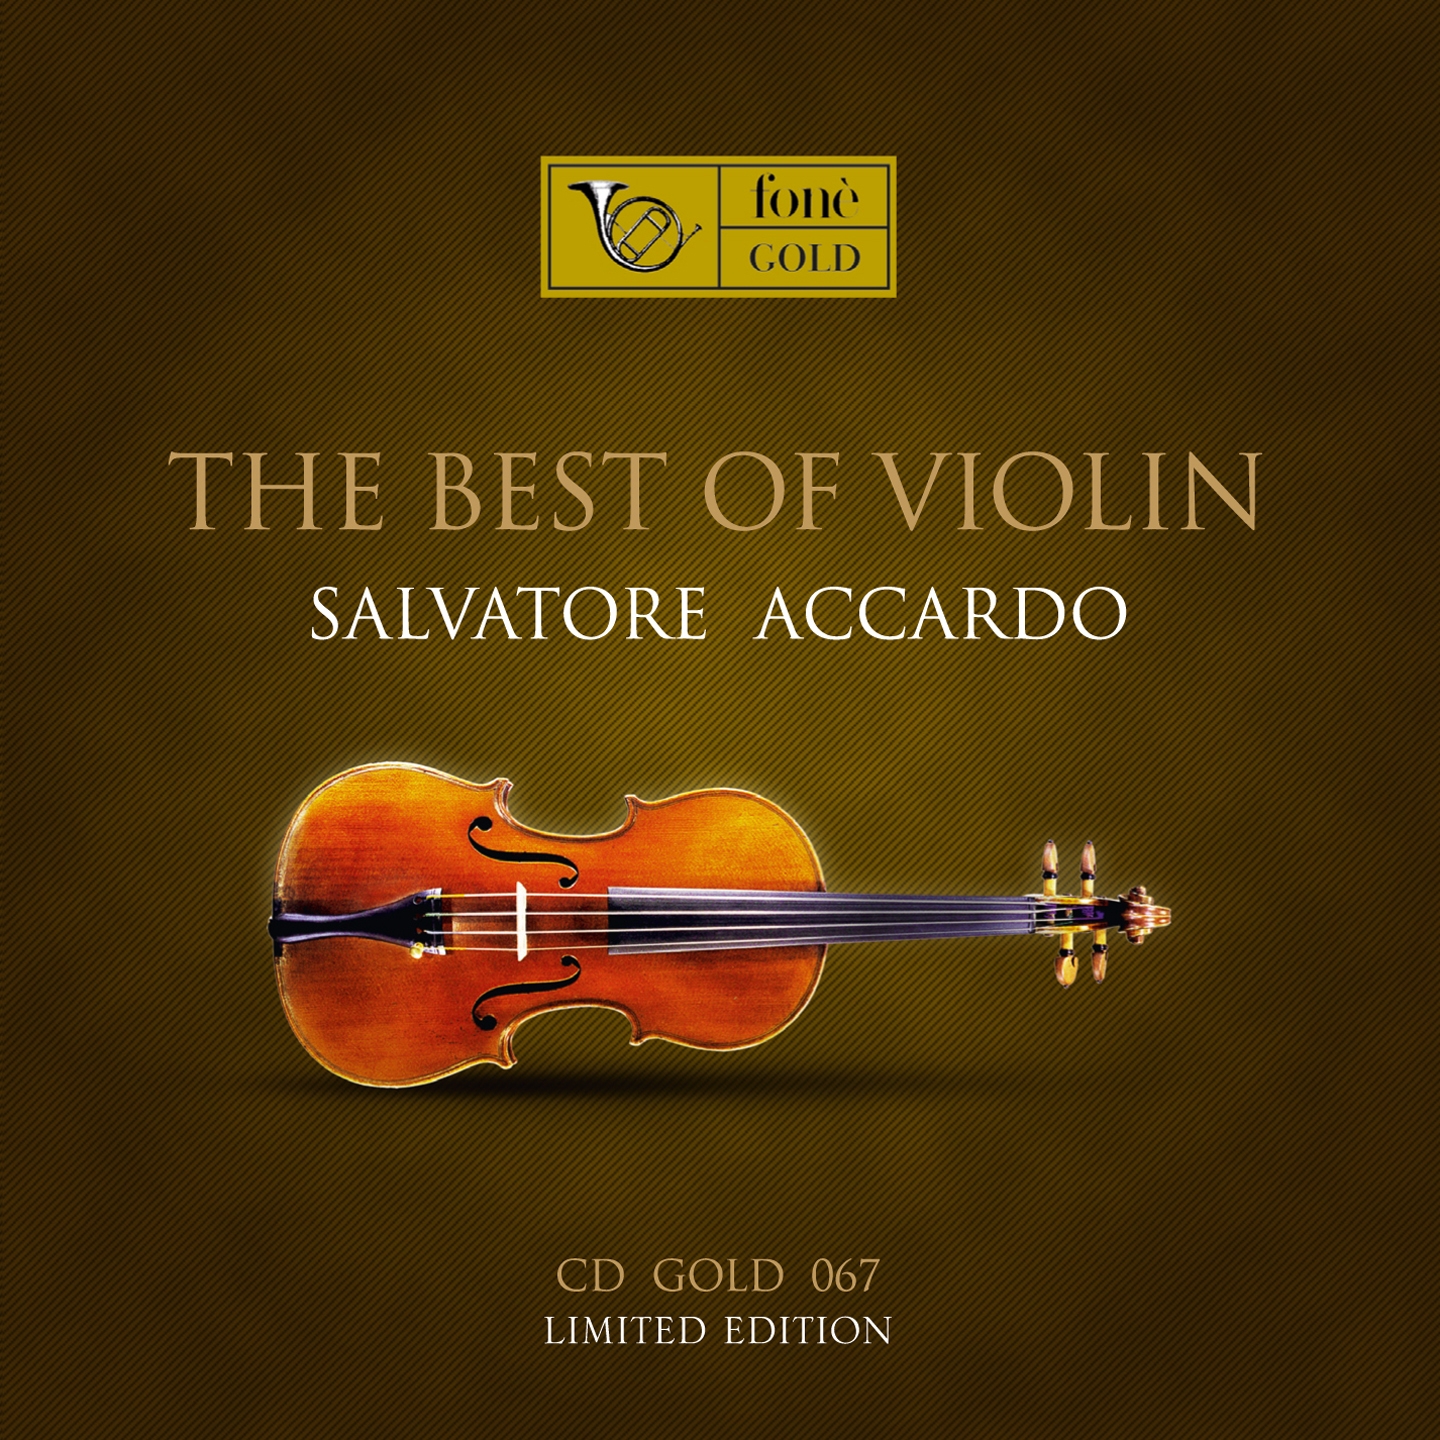 The best of violin (Analog master recording)